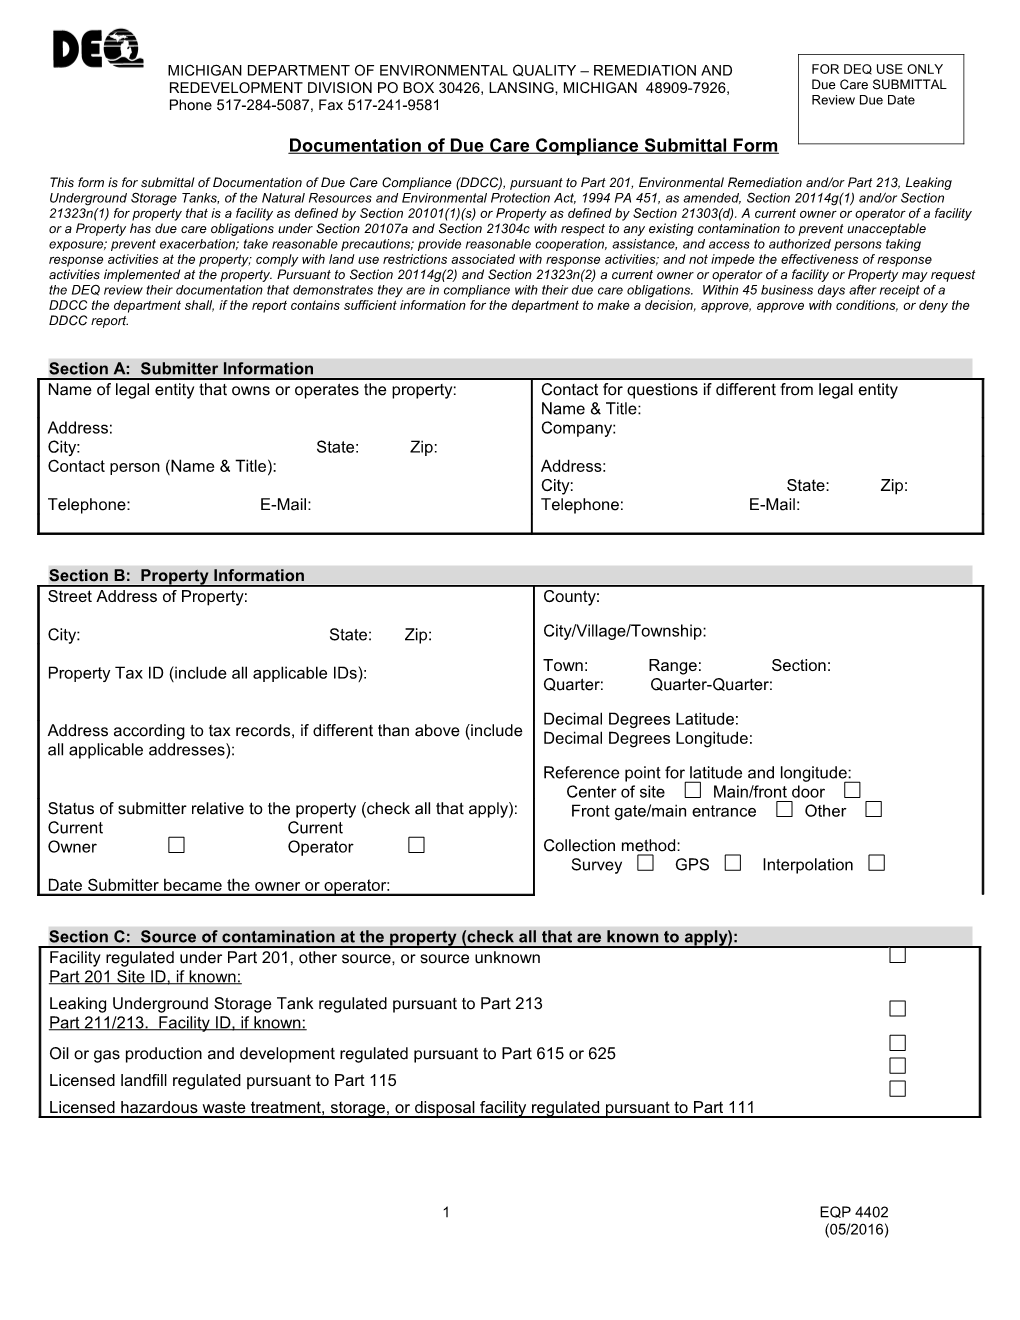 Documentation of Due Care Compliance Submittal Form EQP 4402